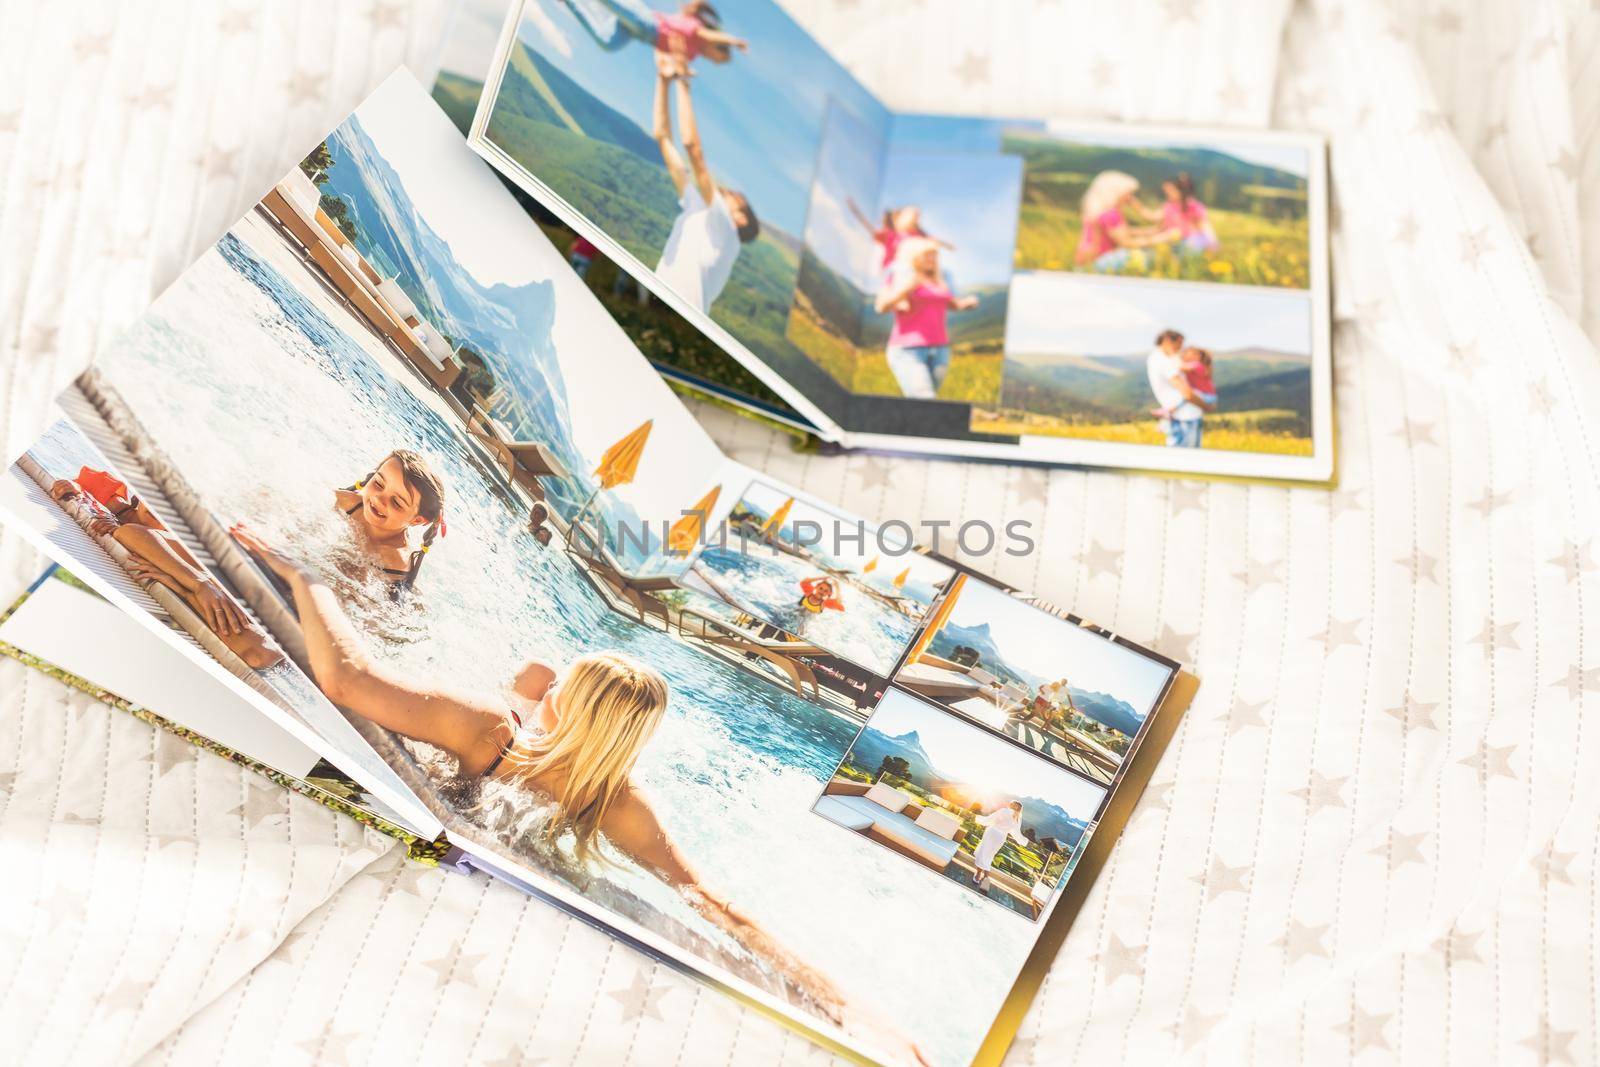 Section of My Photobook Showing Beautiful Travel Scenery by Andelov13